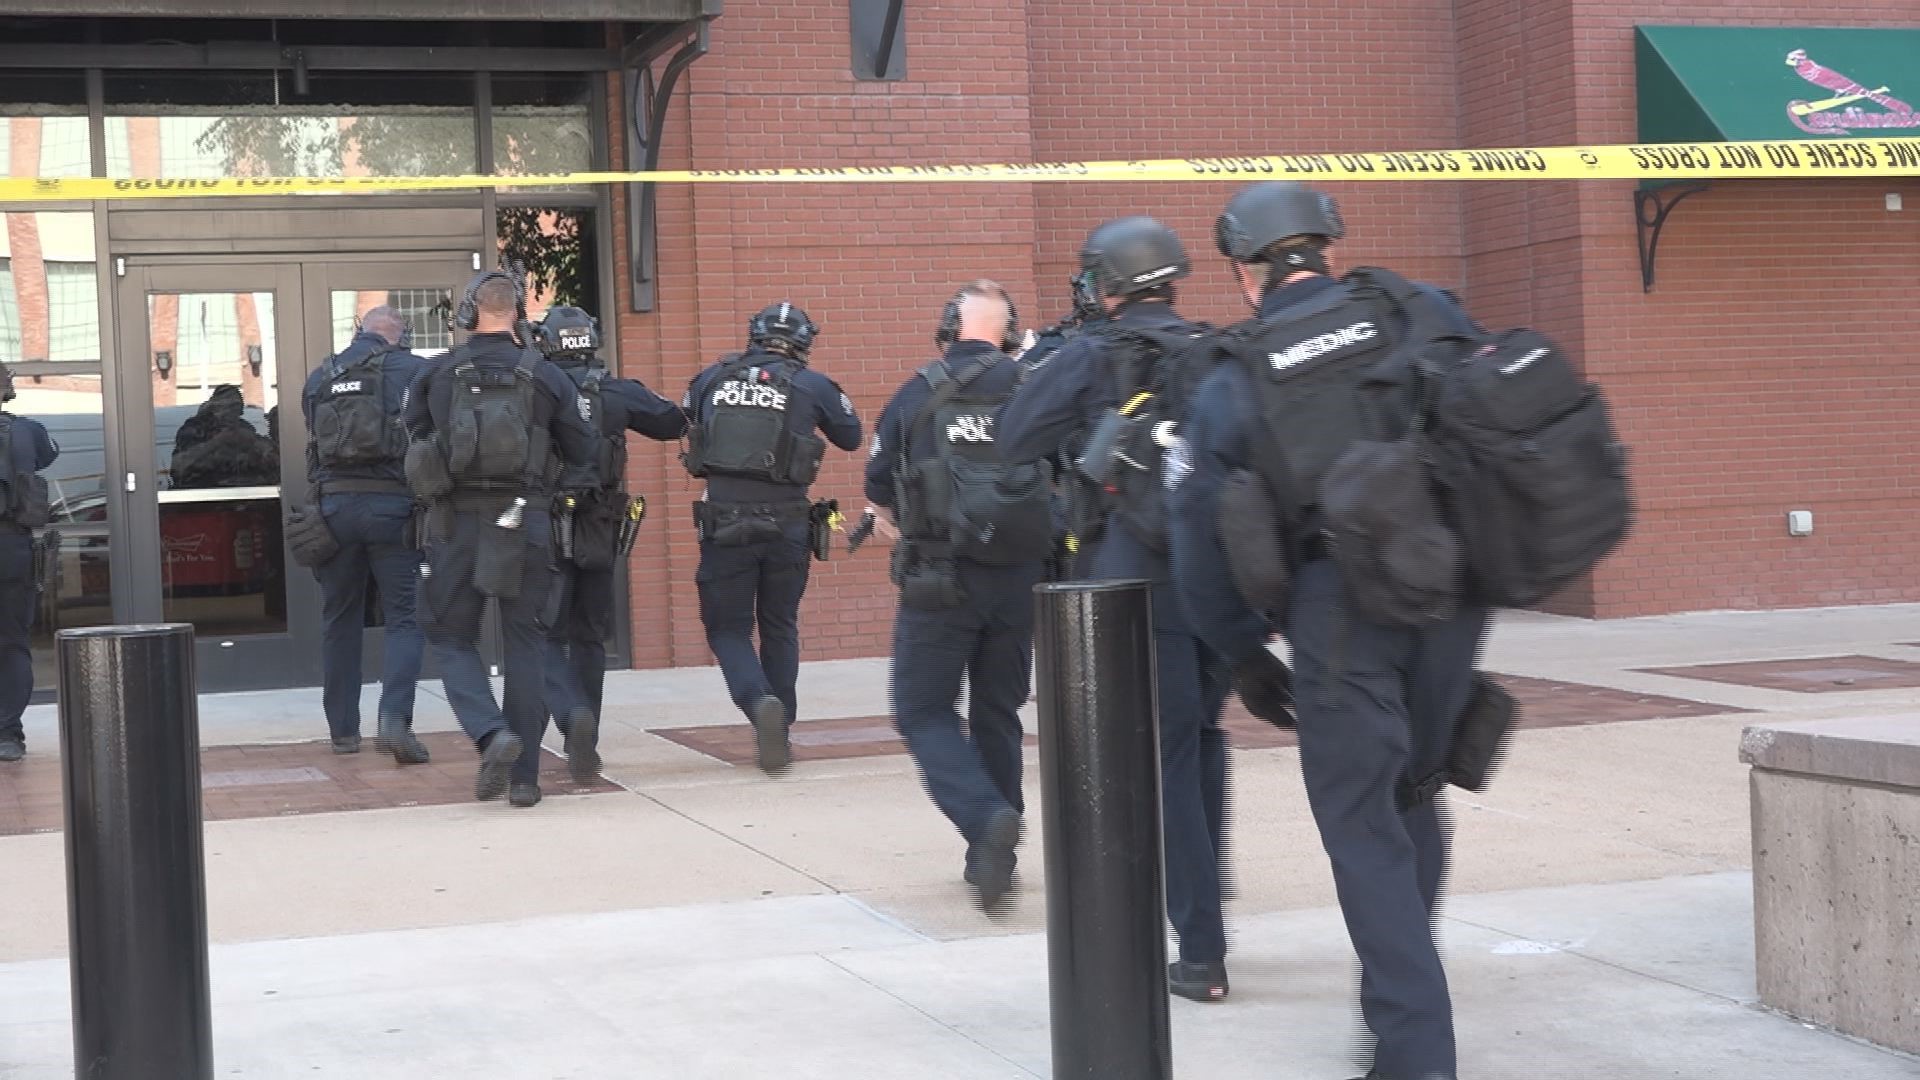 Crime scene tape and police officers surrounded Busch Stadium Wednesday. The activity was part of a drill months in the making.